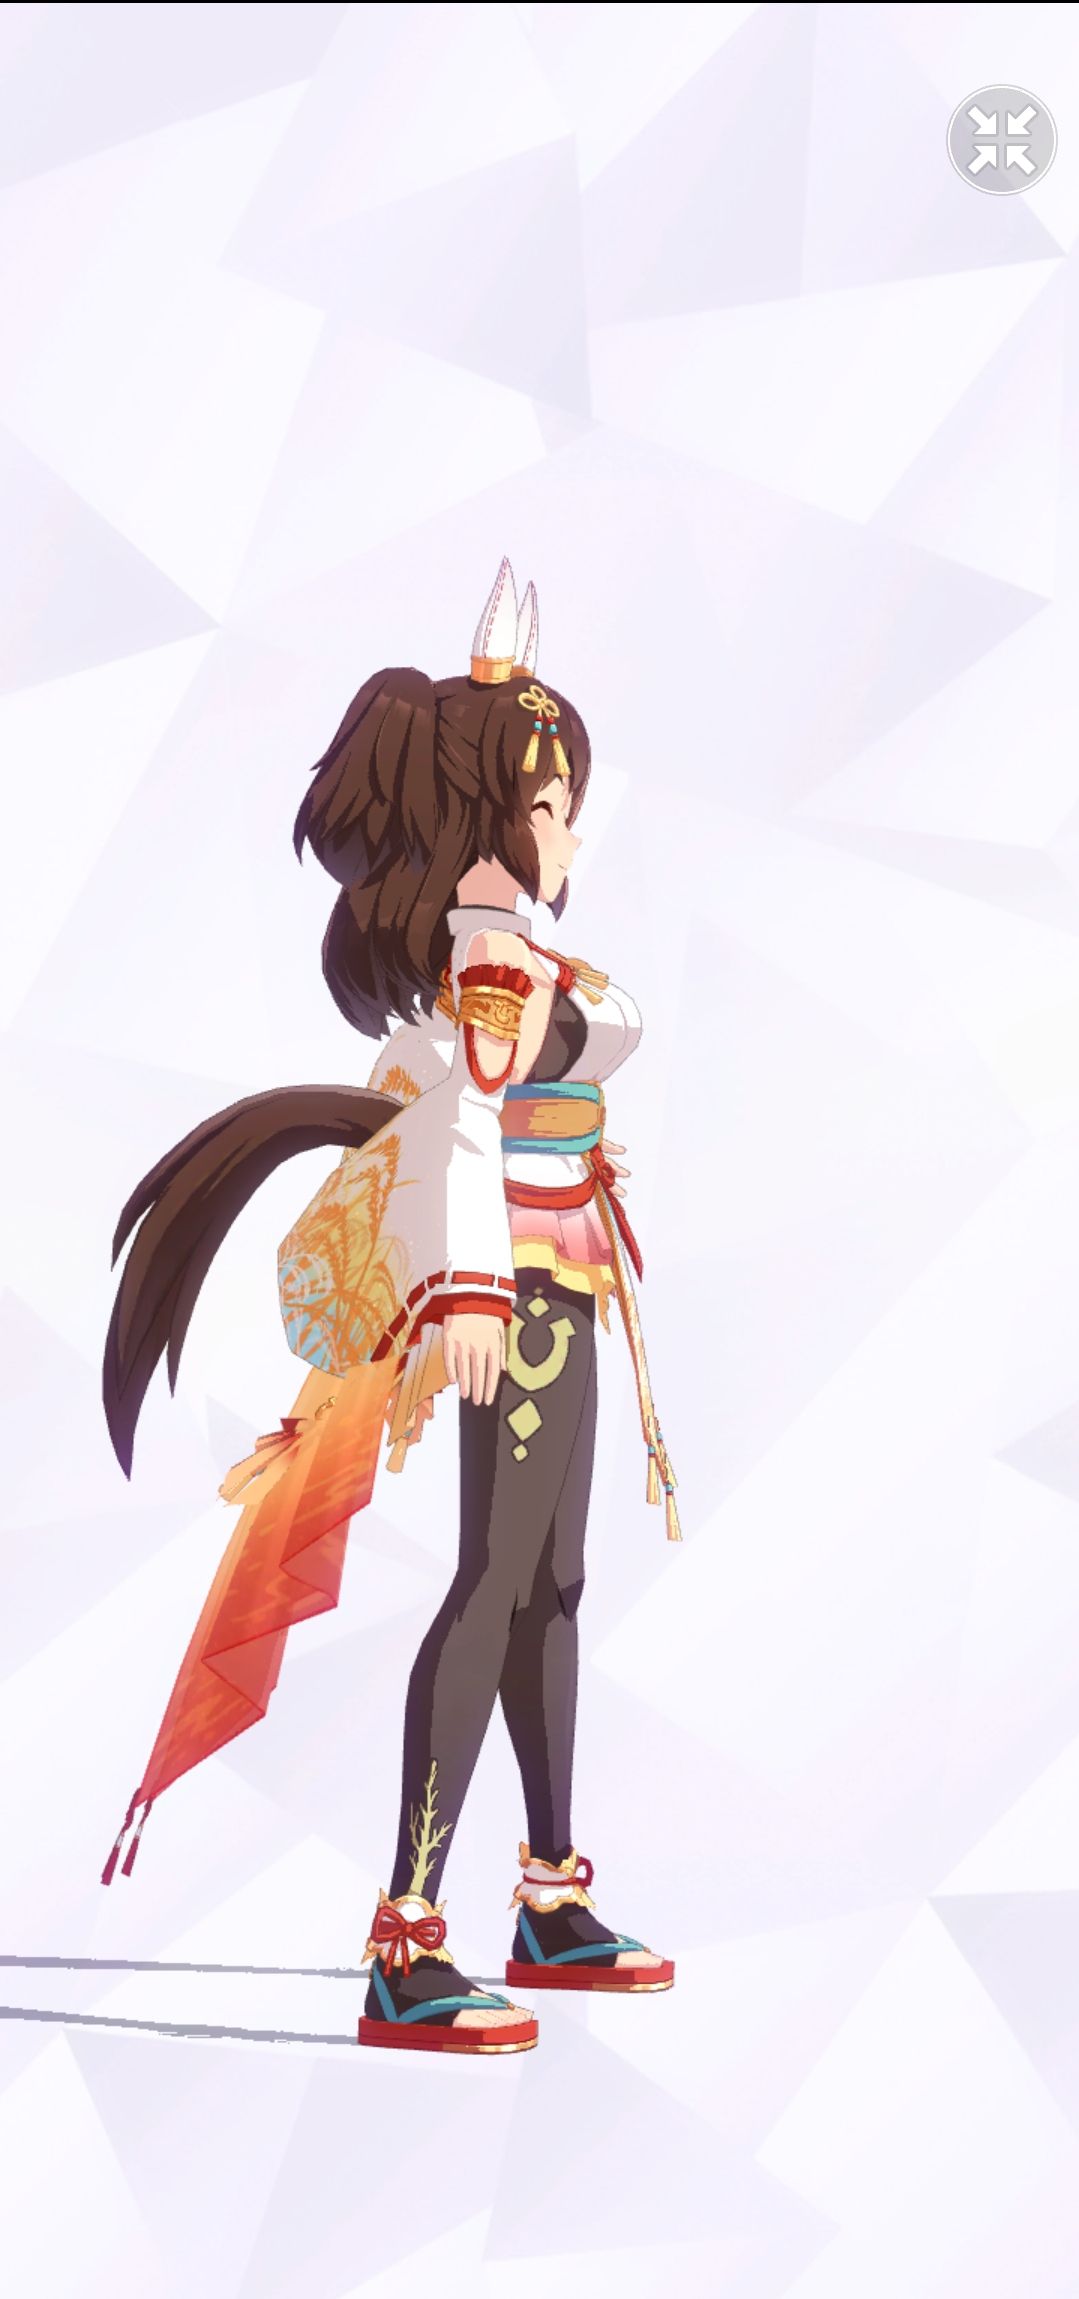 【Good news】Uma Musume will implement the echiechi character of balloon for 3 consecutive times 4